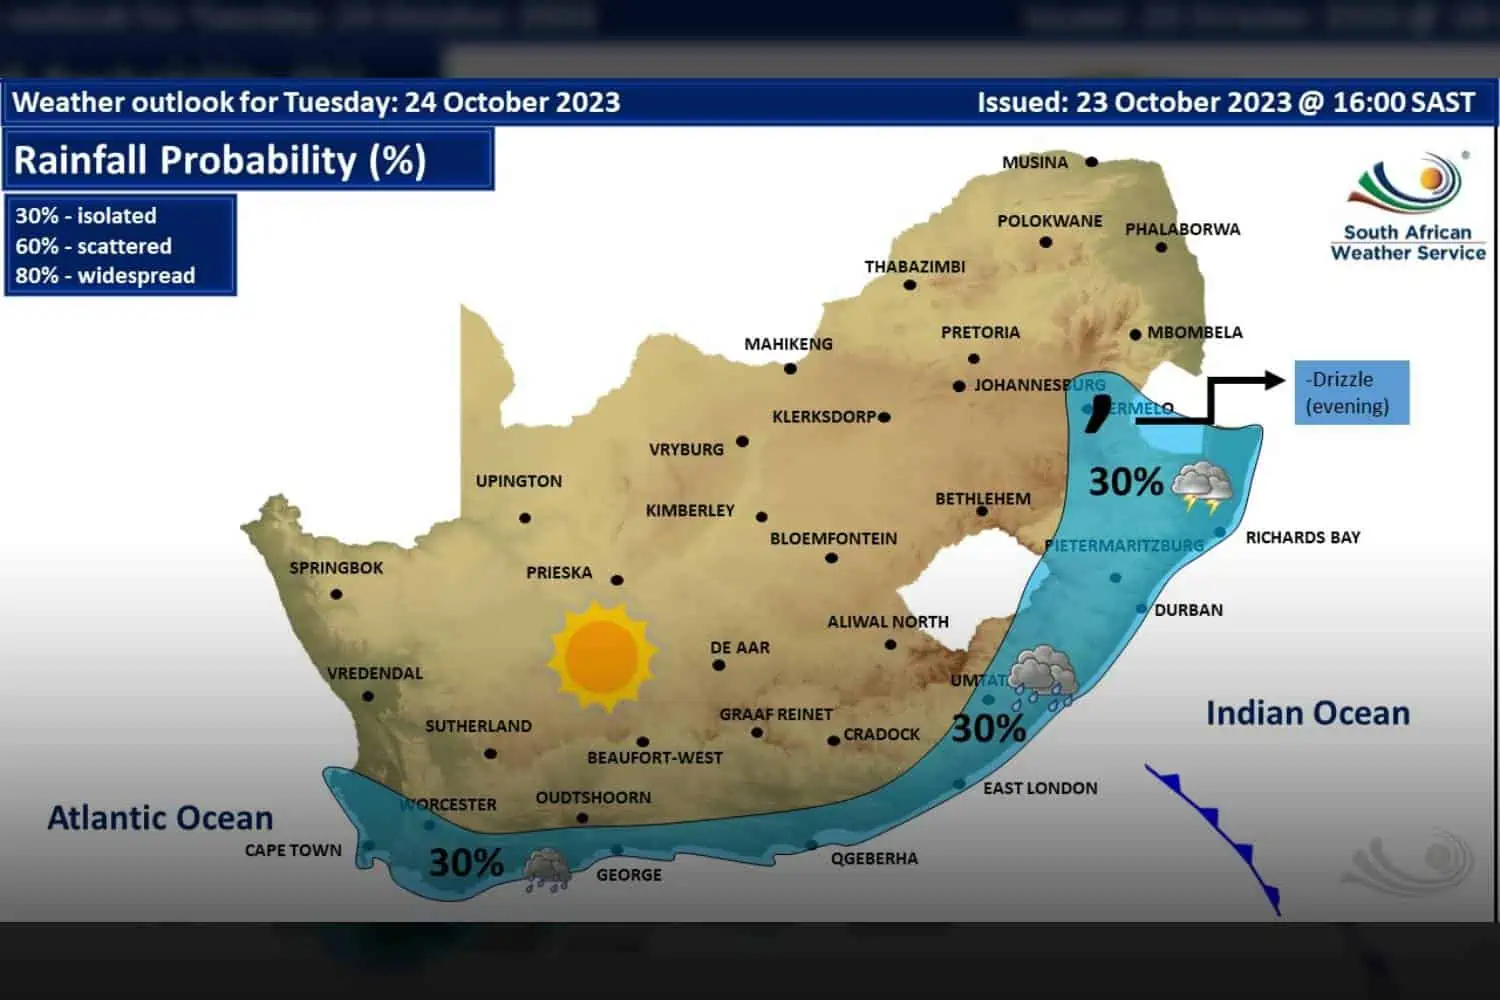 South Africa weather forecast Tuesday 24 October 2023